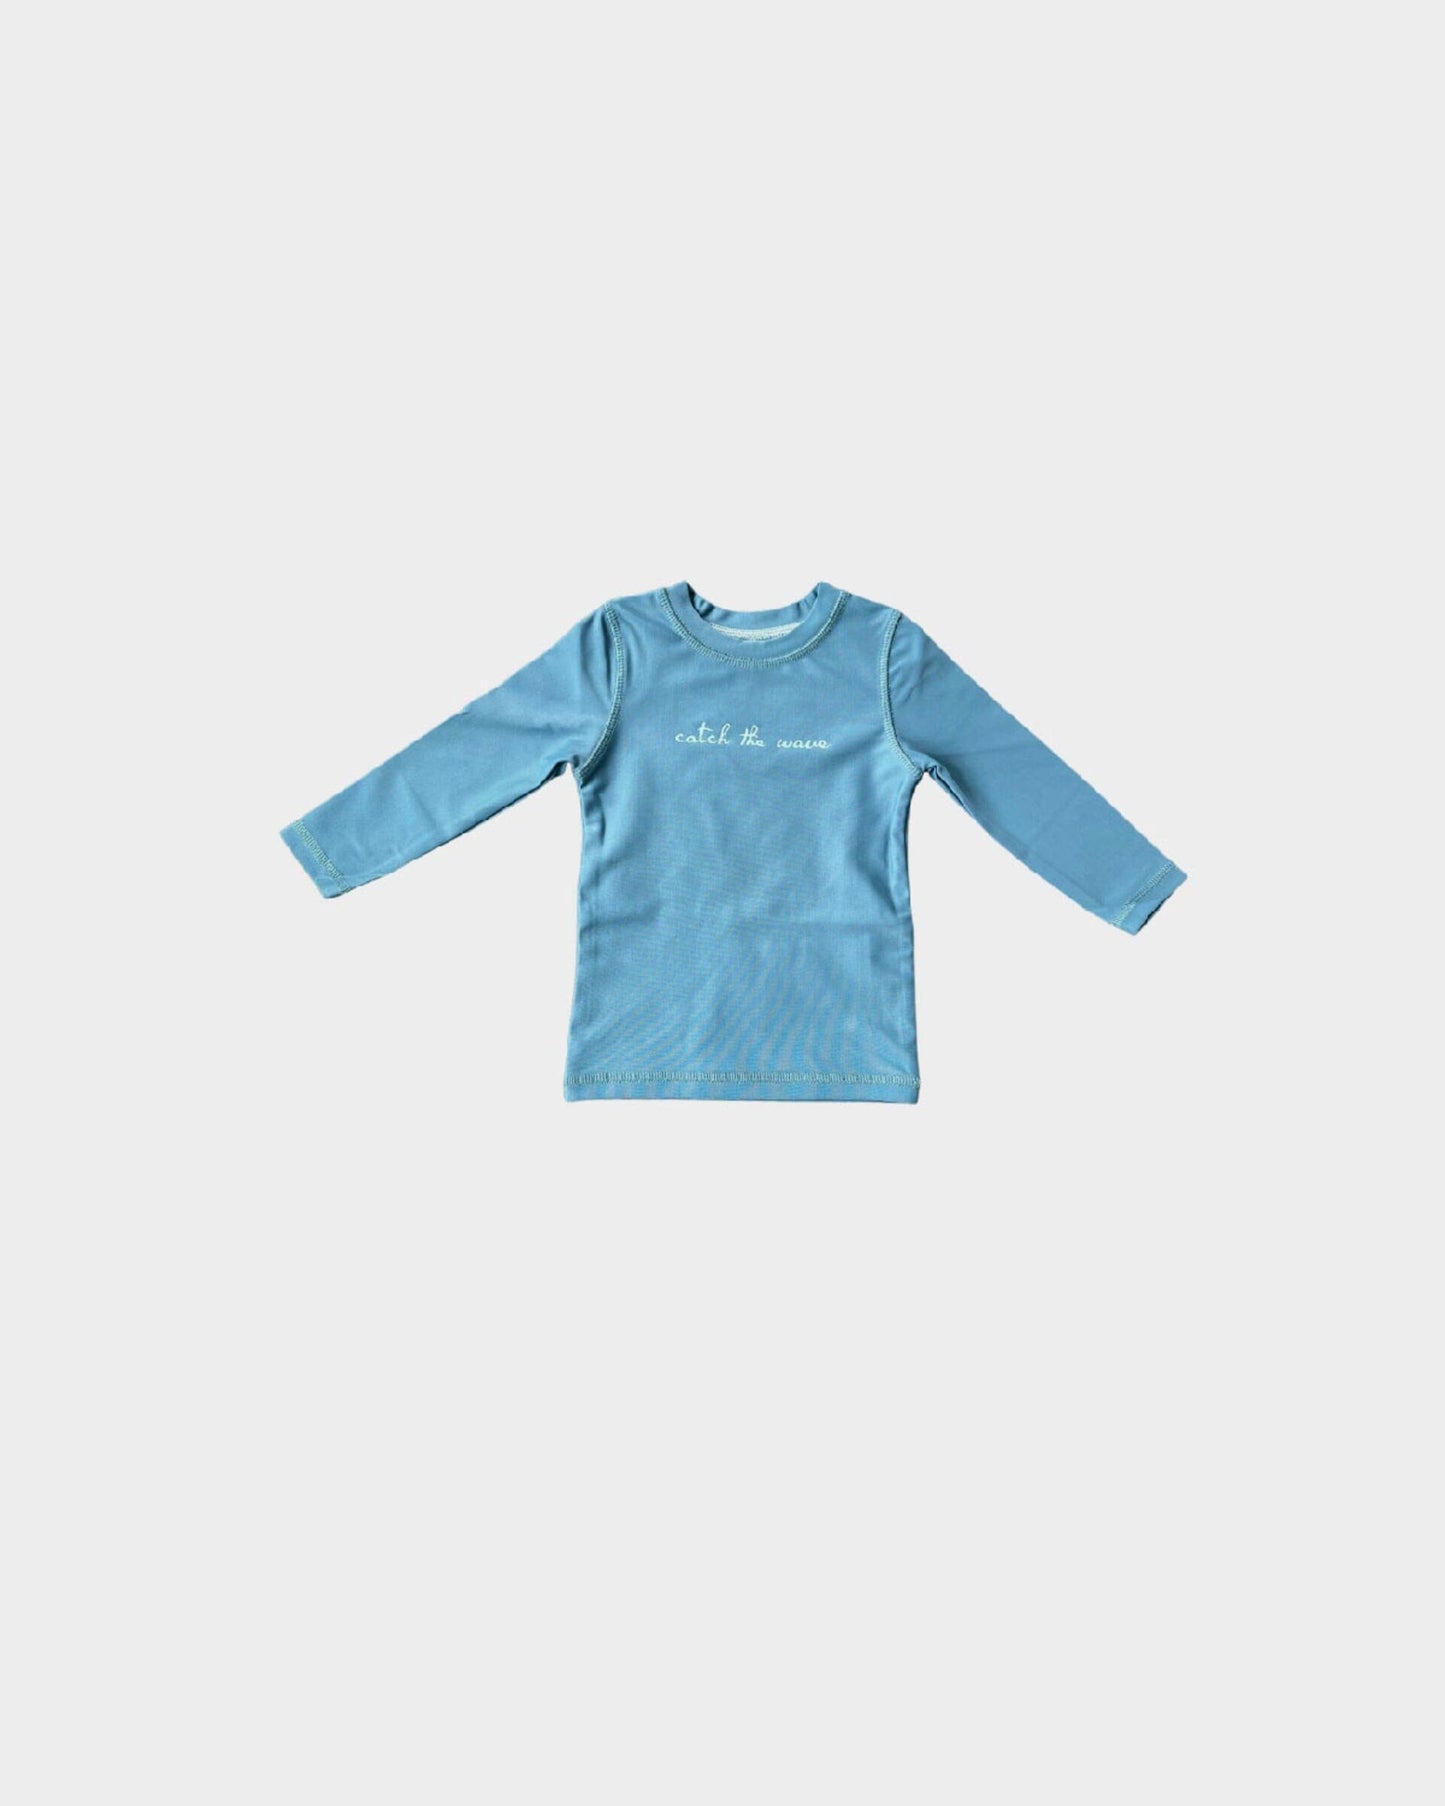 Catch the Wave Rashguard 140 BOYS APPAREL 2-8 Baby Sprouts 2T 